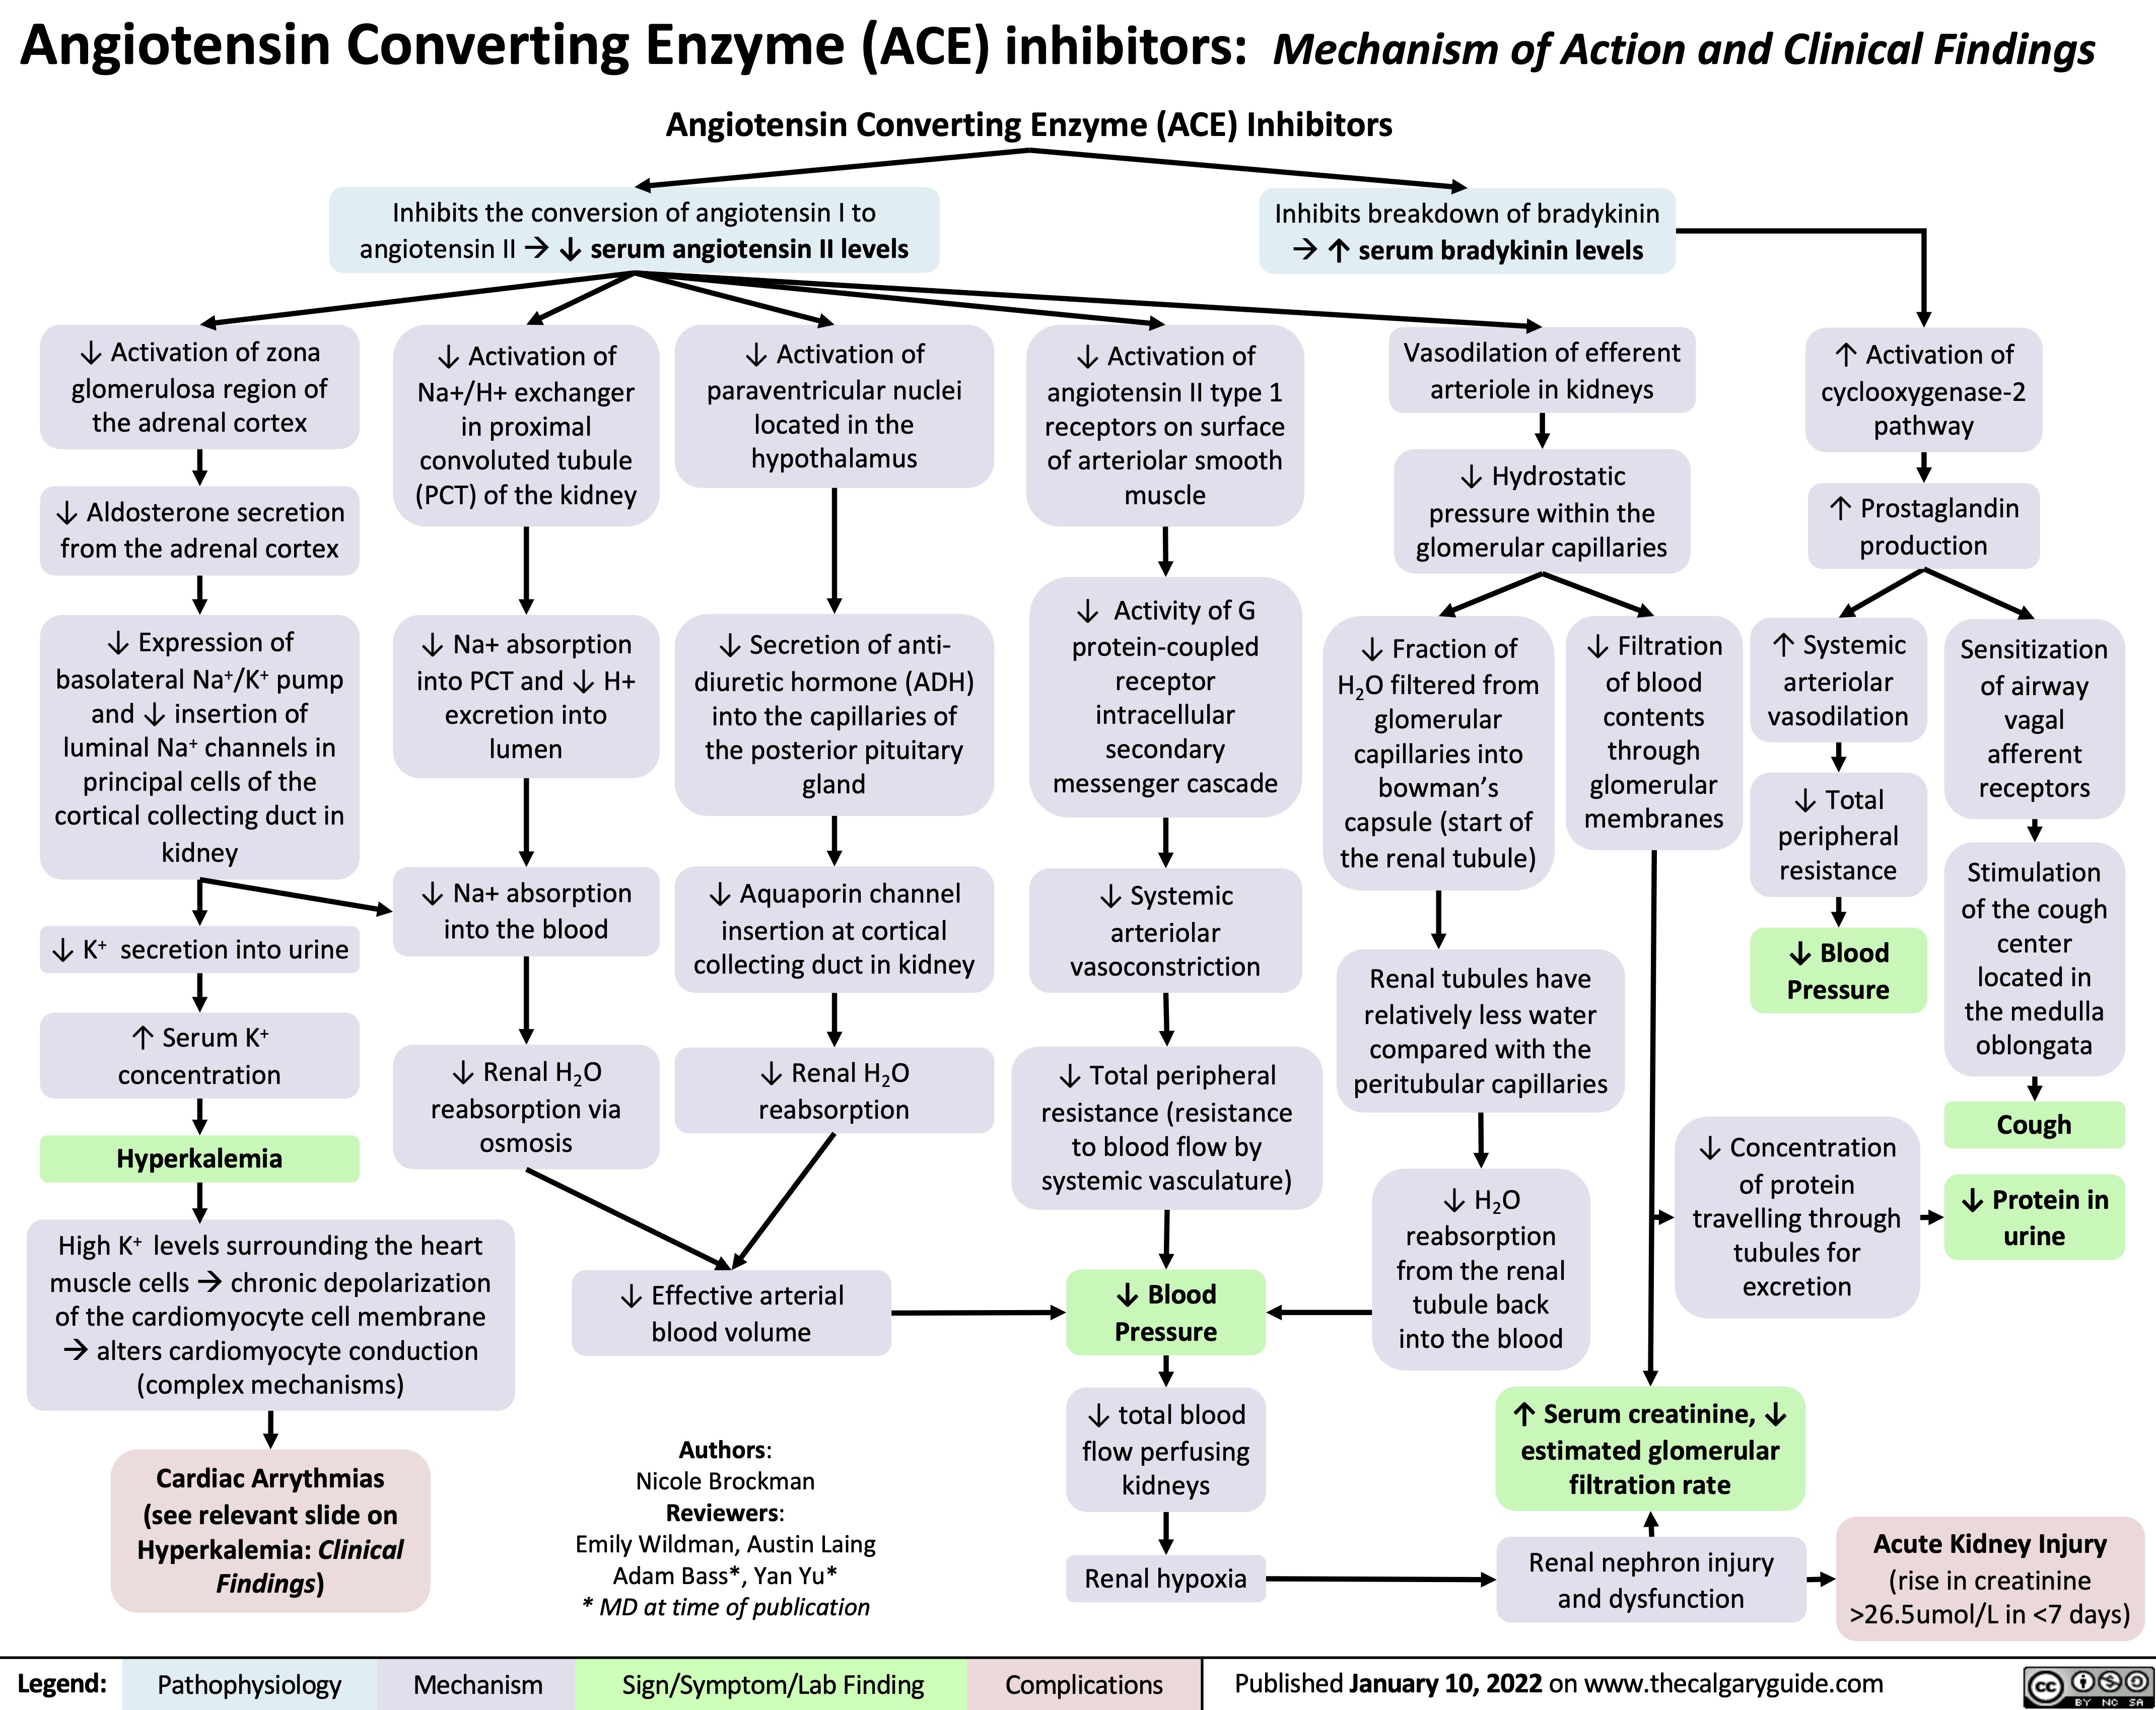 Angiotensin Converting Enzyme (ACE) inhibitors: Mechanism of Action and Clinical Findings Angiotensin Converting Enzyme (ACE) Inhibitors
   Inhibits the conversion of angiotensin I to angiotensin IIà↓ serum angiotensin II levels
Inhibits breakdown of bradykinin
            ↓ Activation of zona glomerulosa region of the adrenal cortex
↓ Aldosterone secretion from the adrenal cortex
↓ Expression of basolateral Na+/K+ pump
and ↓ insertion of luminal Na+ channels in principal cells of the cortical collecting duct in kidney
↓ K+ secretion into urine
↑ Serum K+ concentration
Hyperkalemia
↓ Activation of Na+/H+ exchanger in proximal convoluted tubule (PCT) of the kidney
↓ Na+ absorption into PCT and ↓ H+ excretion into lumen
↓ Na+ absorption into the blood
↓ Renal H2O reabsorption via osmosis
↓ Activation of paraventricular nuclei located in the hypothalamus
↓ Secretion of anti- diuretic hormone (ADH)
into the capillaries of the posterior pituitary gland
↓ Aquaporin channel insertion at cortical collecting duct in kidney
↓ Renal H2O reabsorption
à↑ serum bradykinin levels Vasodilation of efferent
arteriole in kidneys
↓ Hydrostatic pressure within the glomerular capillaries
↑ Activation of cyclooxygenase-2 pathway
↑ Prostaglandin production
↓ Activation of angiotensin II type 1 receptors on surface of arteriolar smooth muscle
↓ Activity of G protein-coupled receptor intracellular secondary messenger cascade
↓ Systemic arteriolar vasoconstriction
↓ Total peripheral resistance (resistance
to blood flow by systemic vasculature)
↓ Blood Pressure
↓ total blood flow perfusing kidneys
Renal hypoxia
↑ Systemic arteriolar vasodilation
↓ Total peripheral resistance
↓ Blood Pressure
↓ Concentration of protein
travelling through tubules for excretion
               ↓ Fraction of H2O filtered from glomerular capillaries into bowman’s capsule (start of the renal tubule)
↓ Filtration of blood contents through glomerular membranes
Sensitization of airway vagal afferent receptors
Stimulation of the cough
center located in the medulla oblongata
Cough
↓ Protein in urine
                        High K+ levels surrounding the heart muscle cellsàchronic depolarization
of the cardiomyocyte cell membrane àalters cardiomyocyte conduction (complex mechanisms)
Cardiac Arrythmias (see relevant slide on Hyperkalemia: Clinical Findings)
↓ Effective arterial blood volume
Authors:
Nicole Brockman Reviewers:
Emily Wildman, Austin Laing Adam Bass*, Yan Yu*
* MD at time of publication
Renal tubules have relatively less water compared with the peritubular capillaries
↓ H2O reabsorption from the renal tubule back into the blood
     ↑ Serum creatinine, ↓ estimated glomerular filtration rate
Renal nephron injury and dysfunction
Acute Kidney Injury
(rise in creatinine >26.5umol/L in <7 days)
      Legend:
 Pathophysiology
Mechanism
Sign/Symptom/Lab Finding
 Complications
Published January 10, 2022 on www.thecalgaryguide.com
    